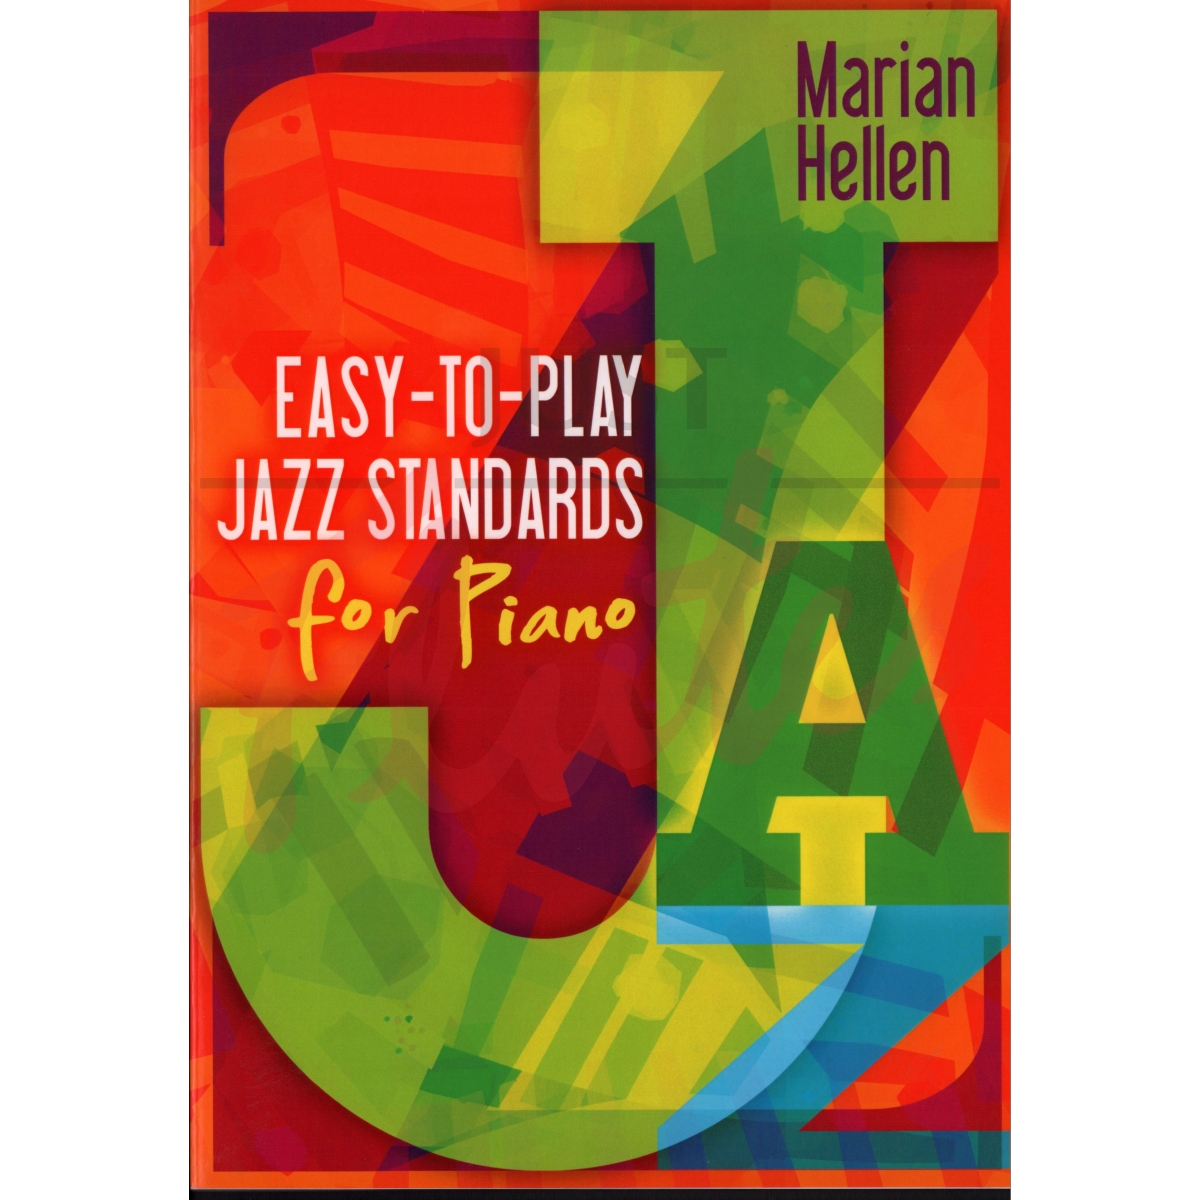 Easy-to-Play Jazz Standards for Piano